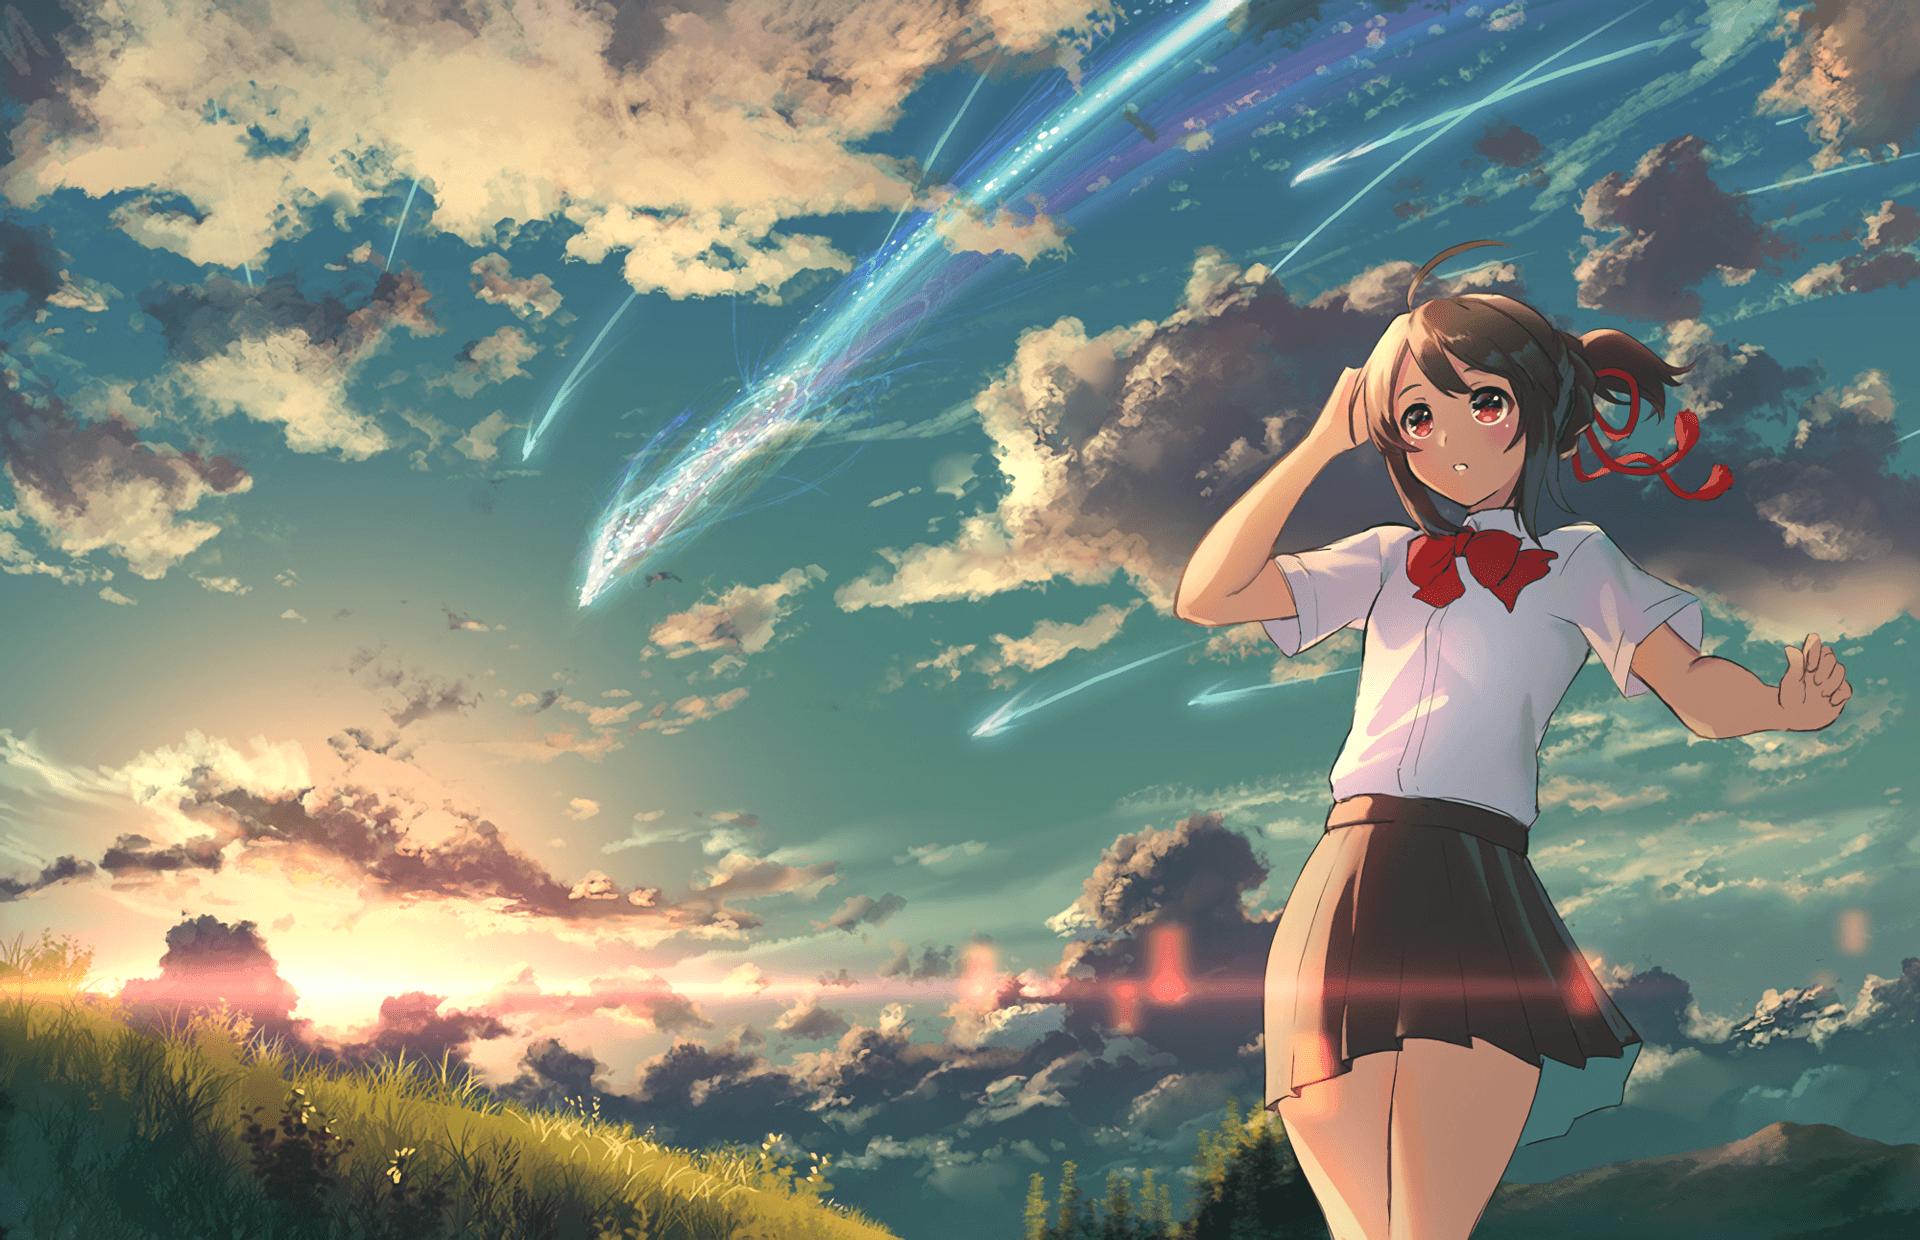 Your Name Download Best Hd Wallpaper, your name, Anime